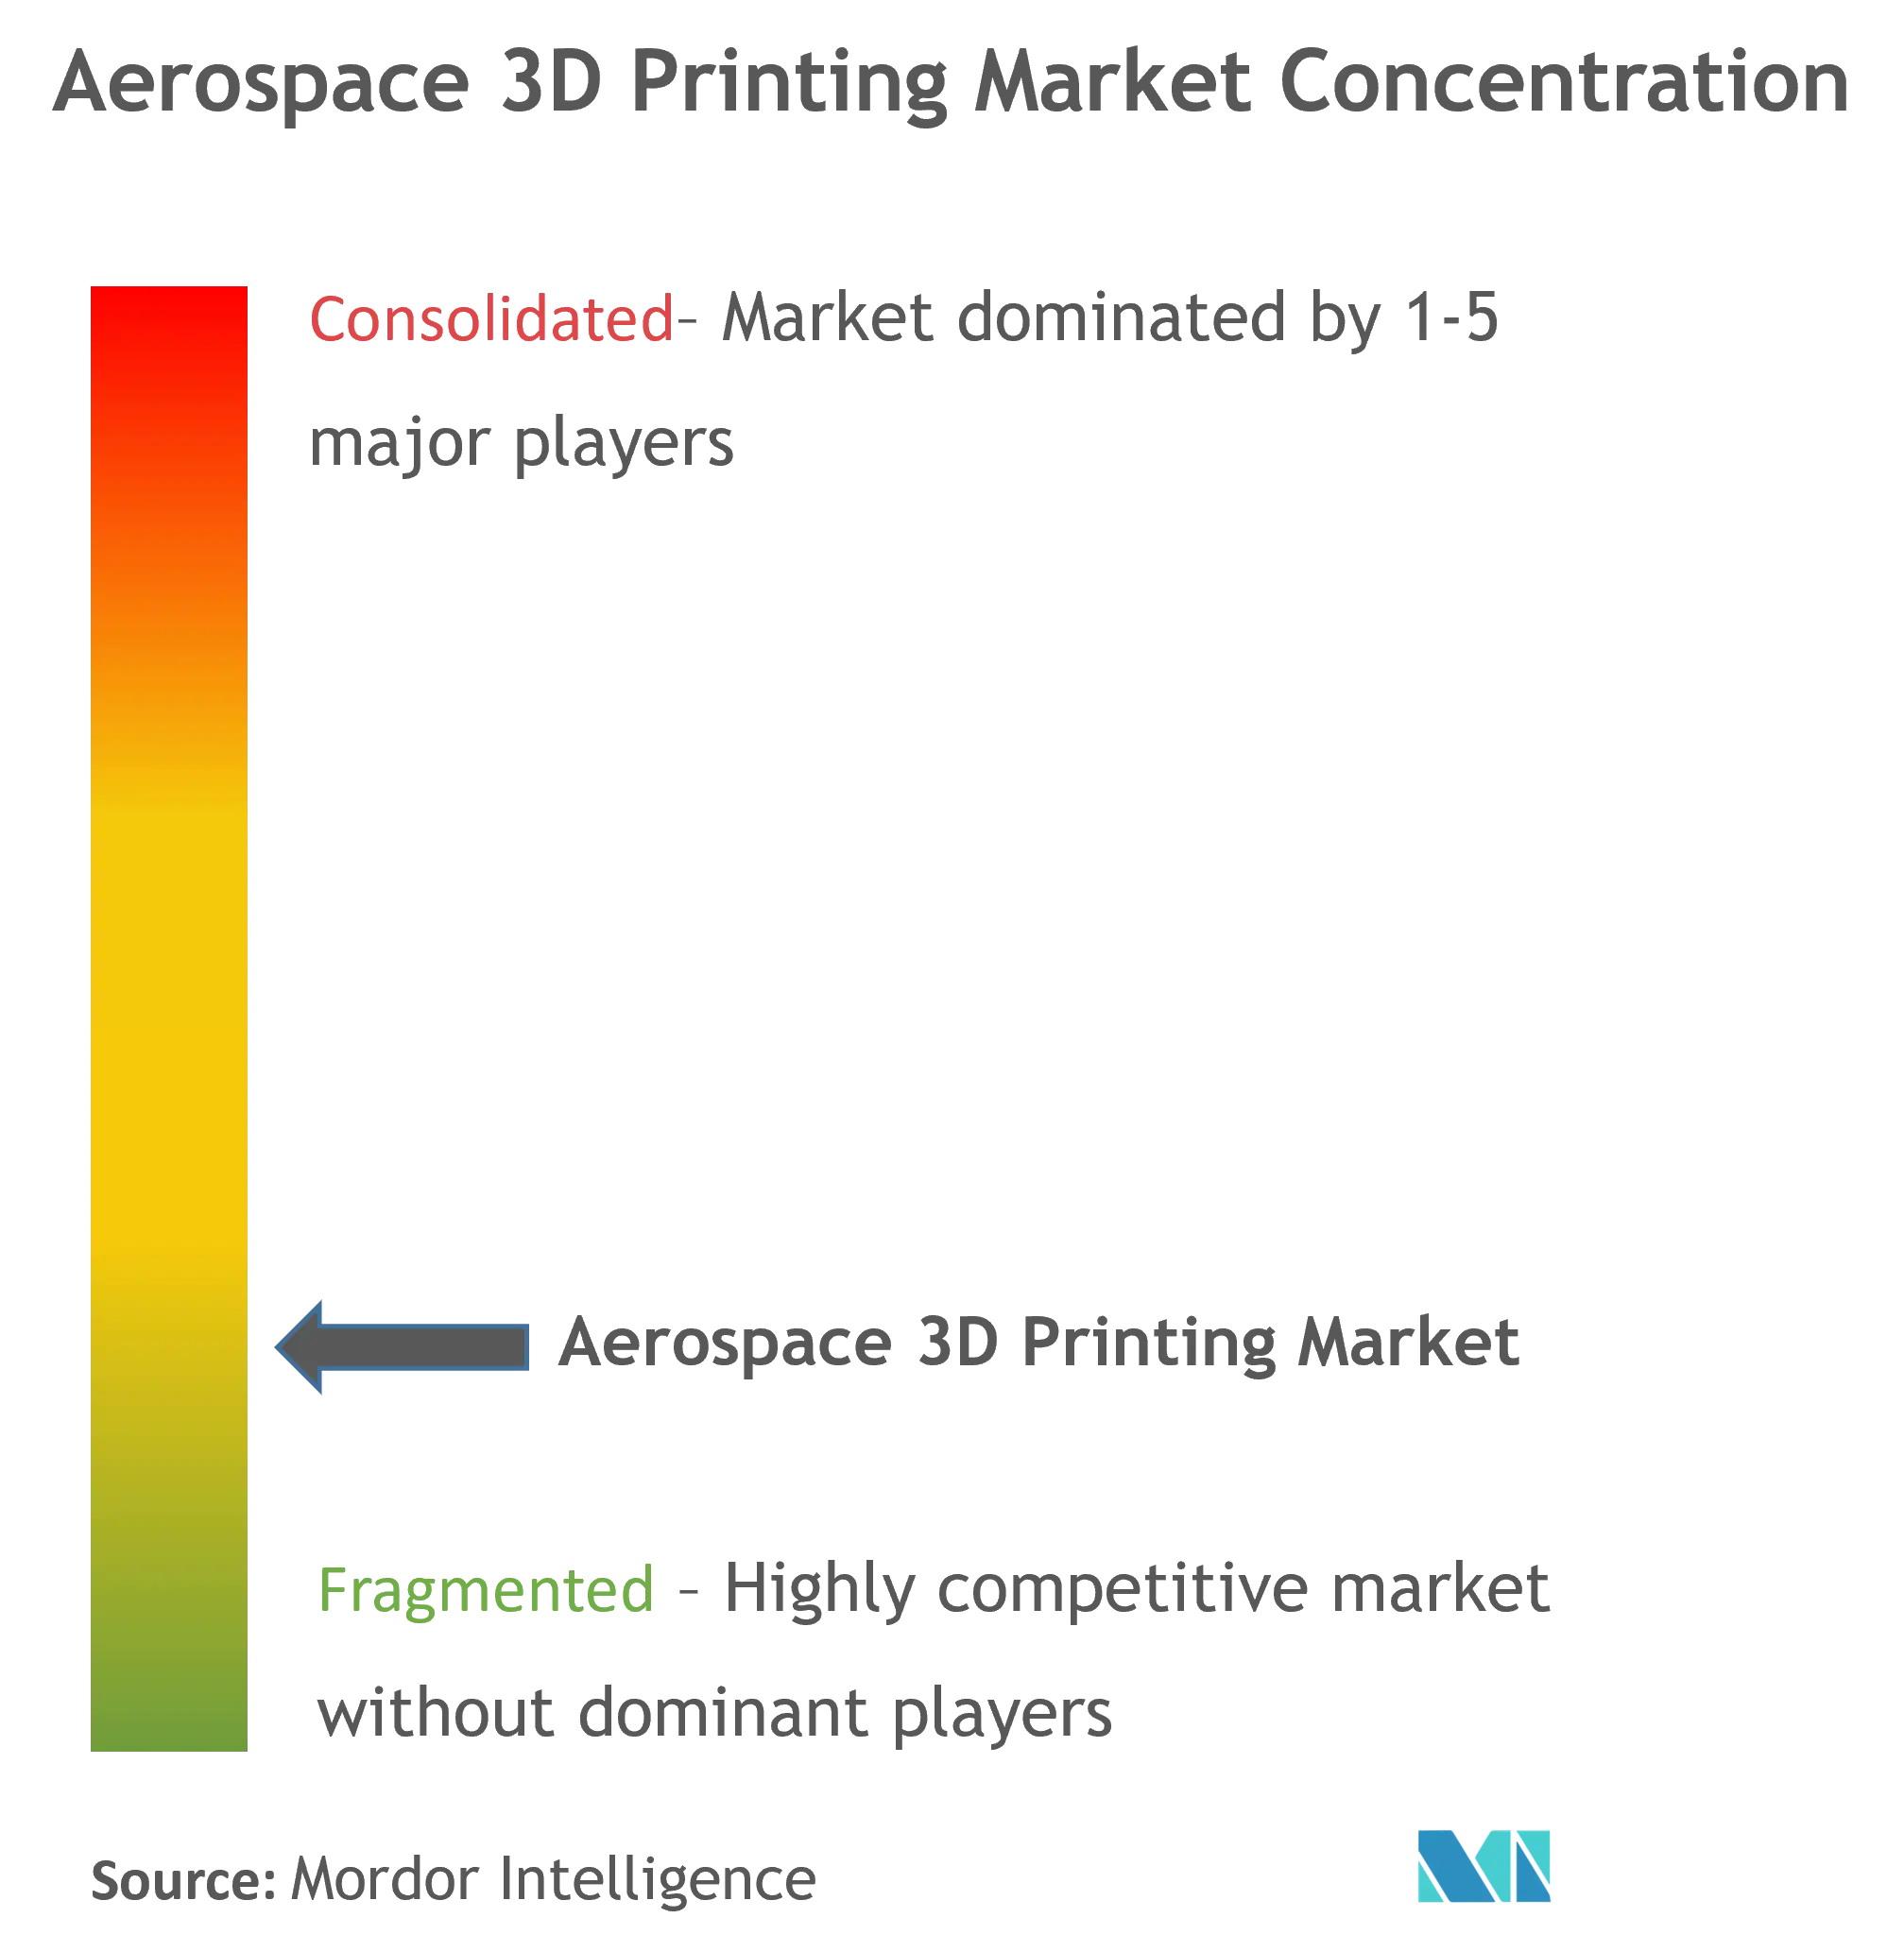 3D Printing In Aerospace And Defense Market Concentration